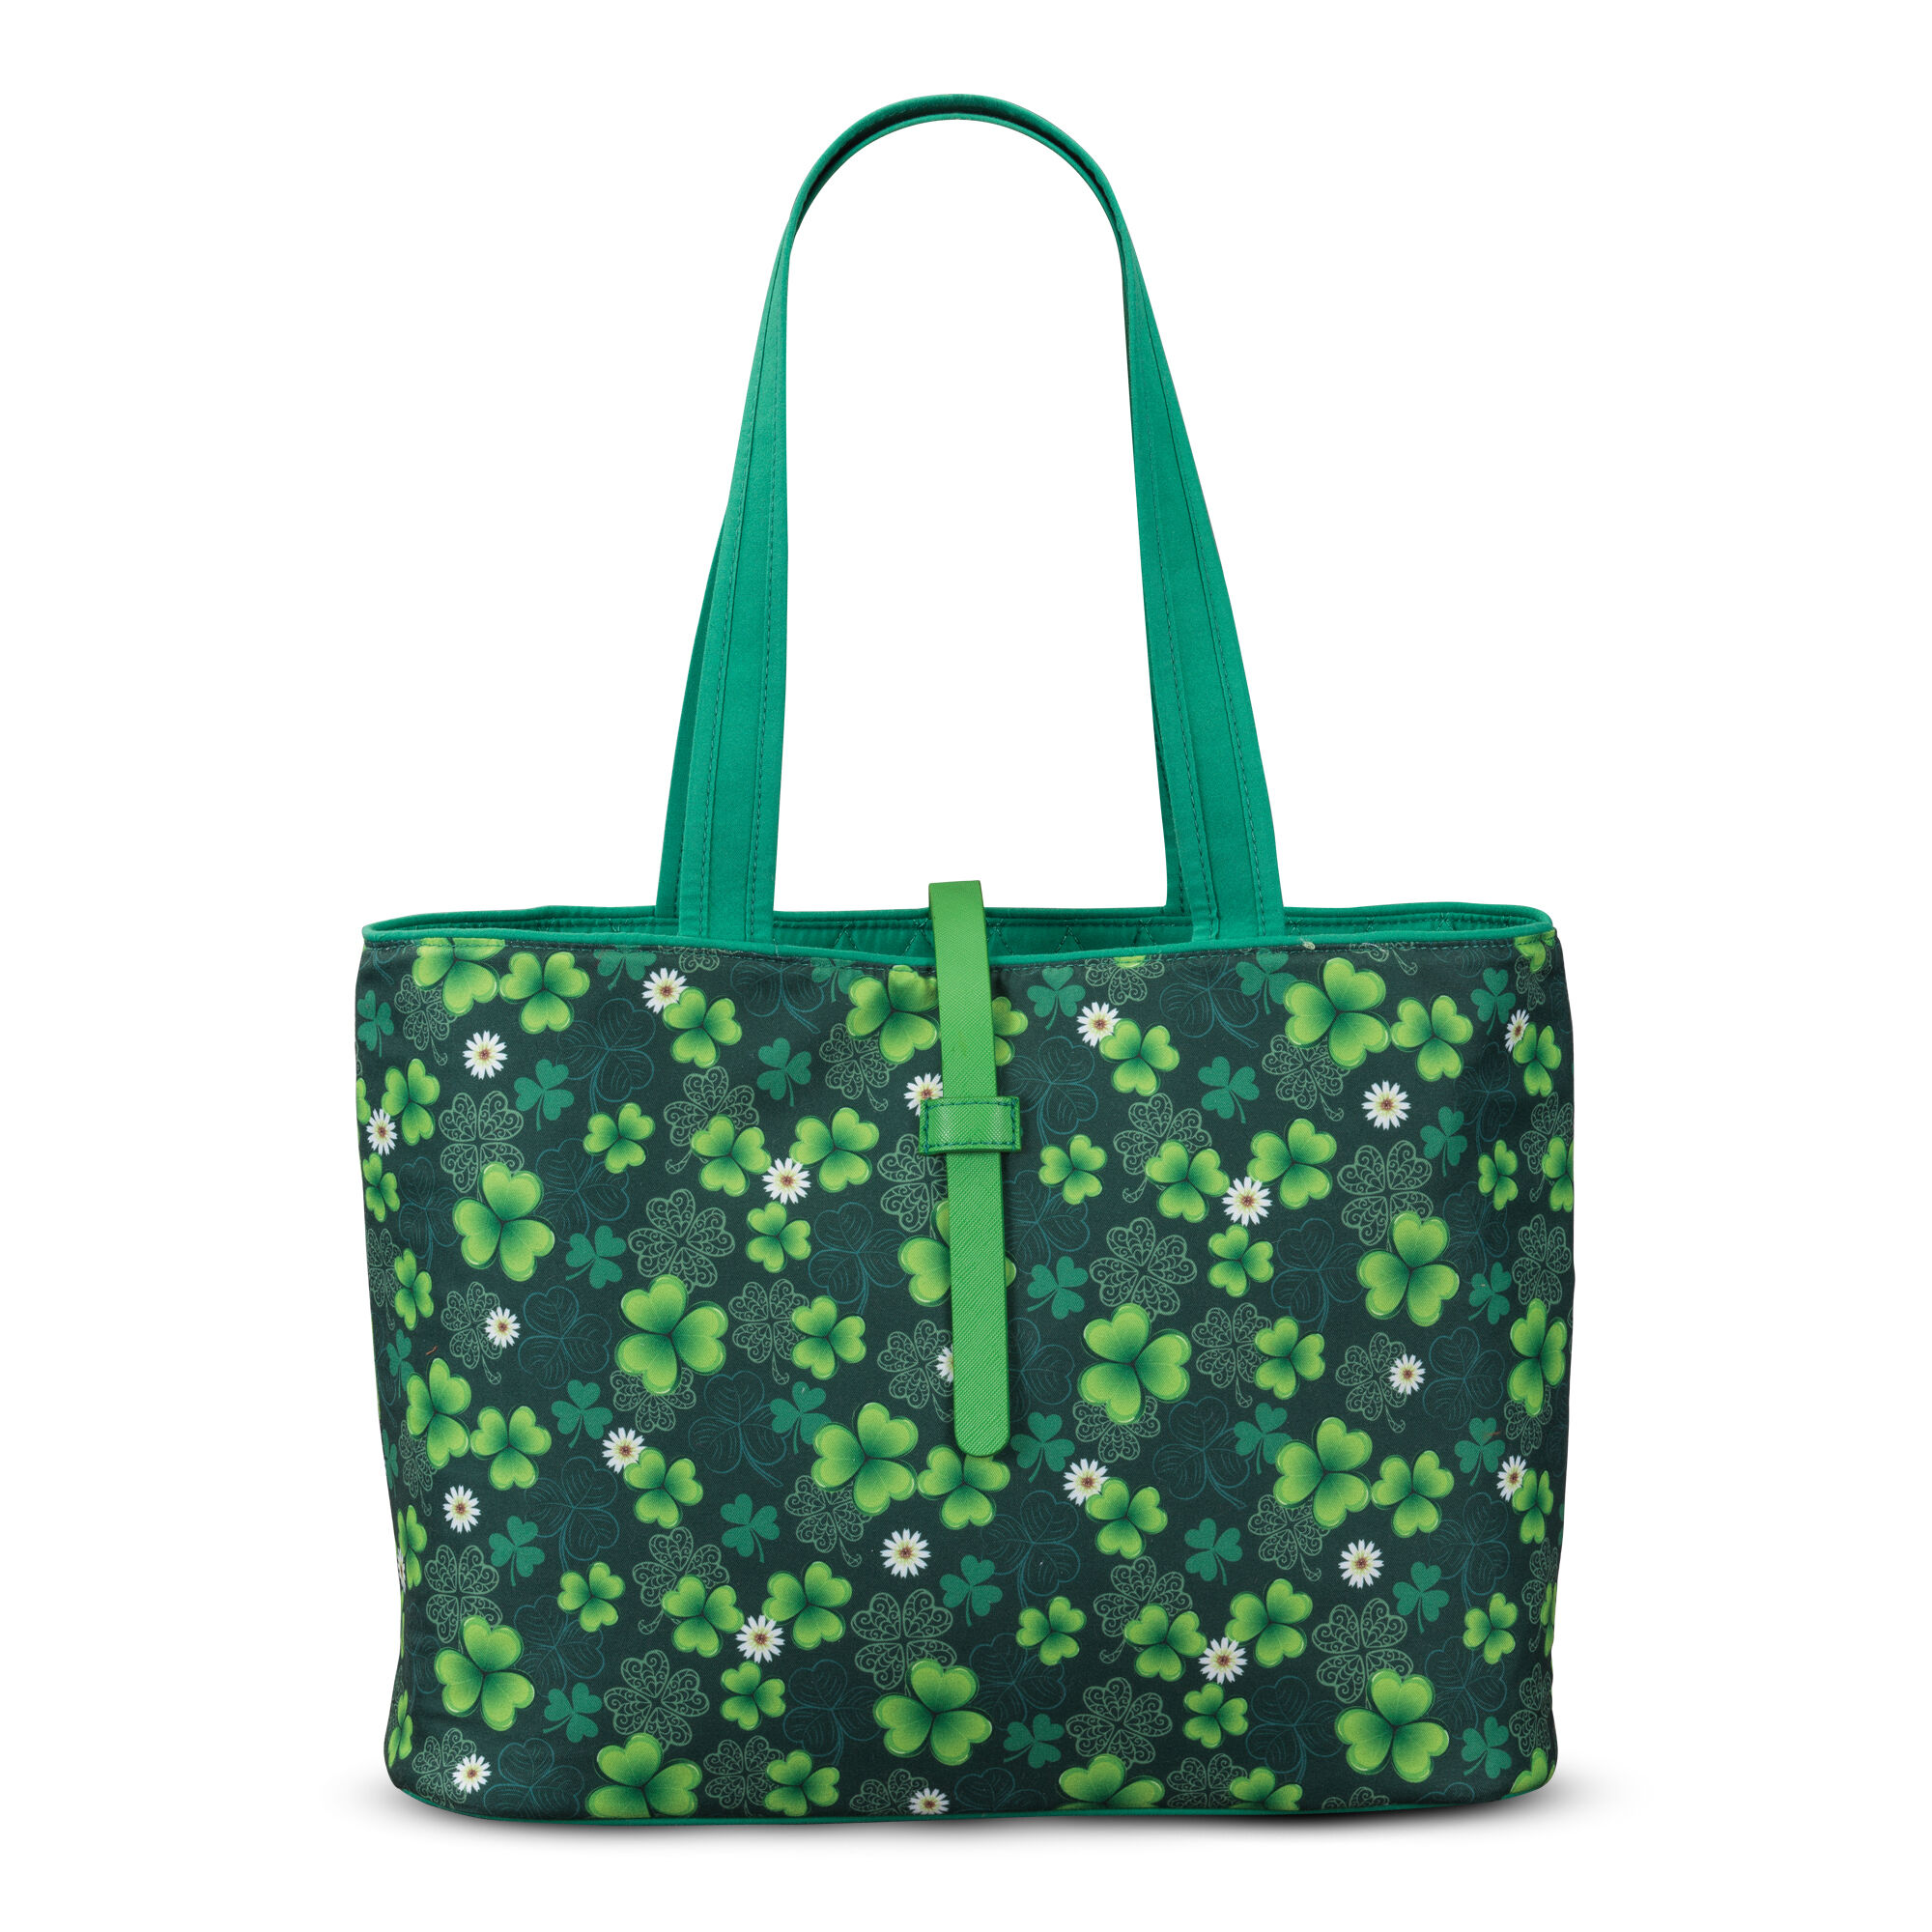 Twice the Fun Reversible Totes 10360 0011 c march